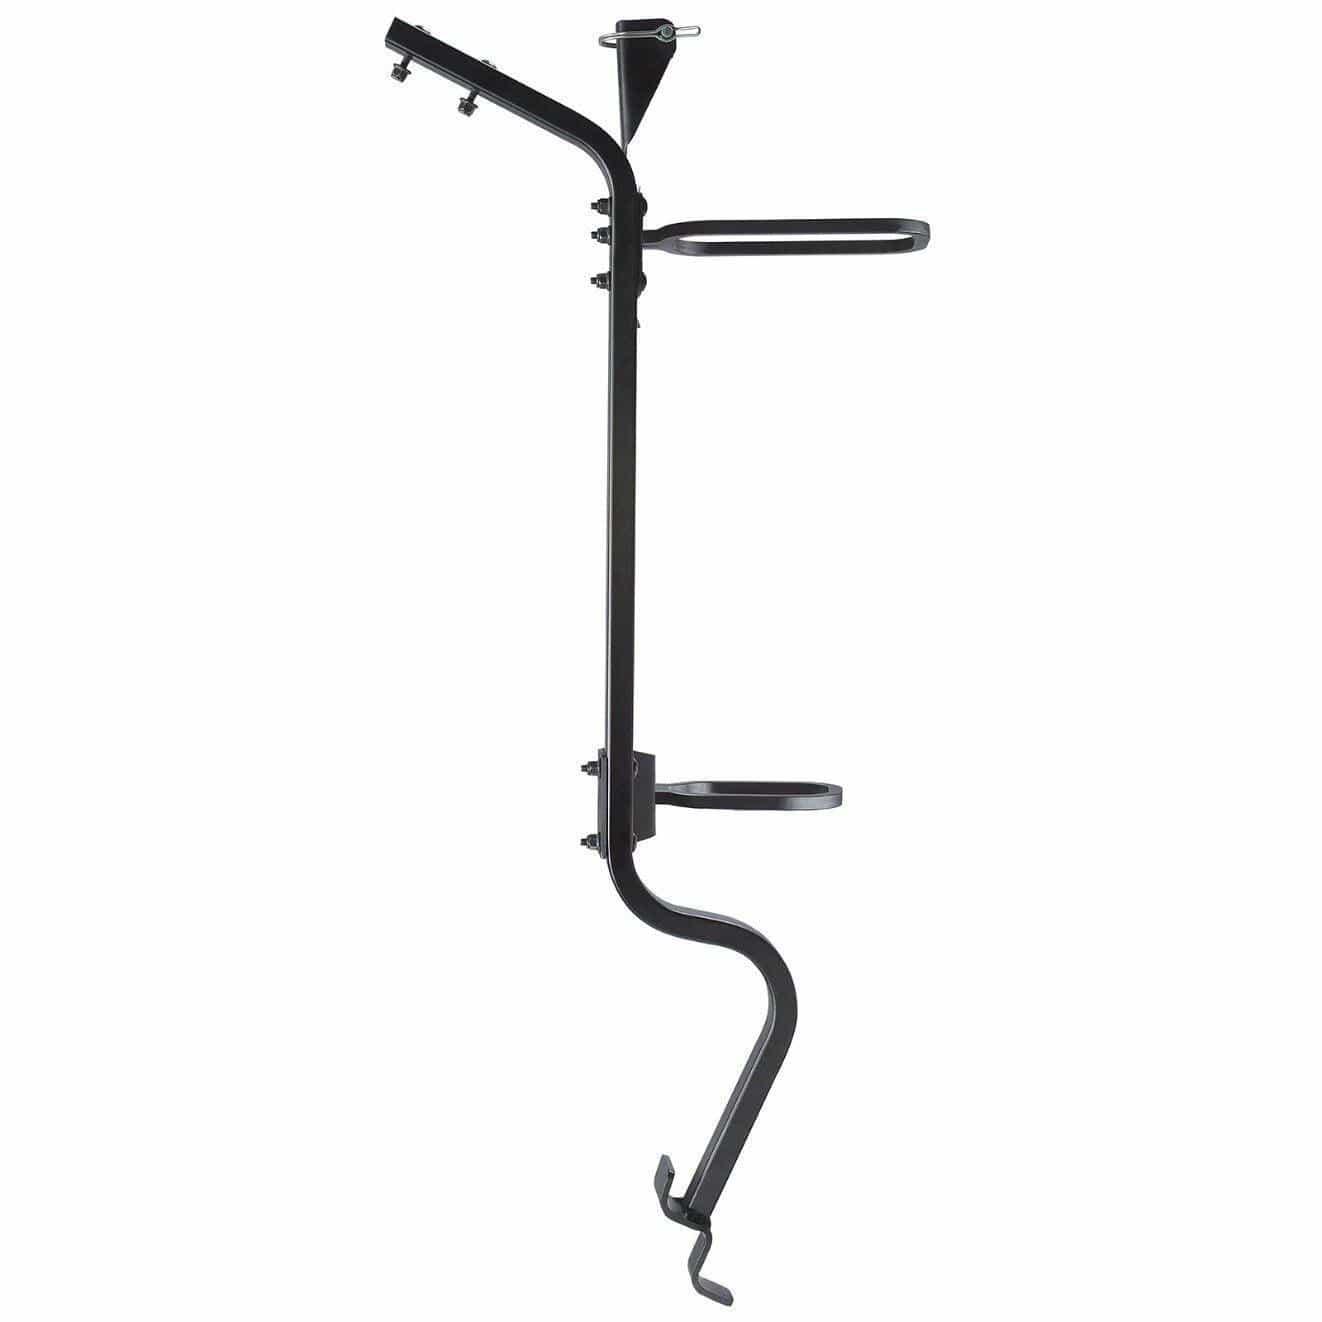 LinQ™ Gun Boot Rack - G2 MAX and X mr 1000 models only